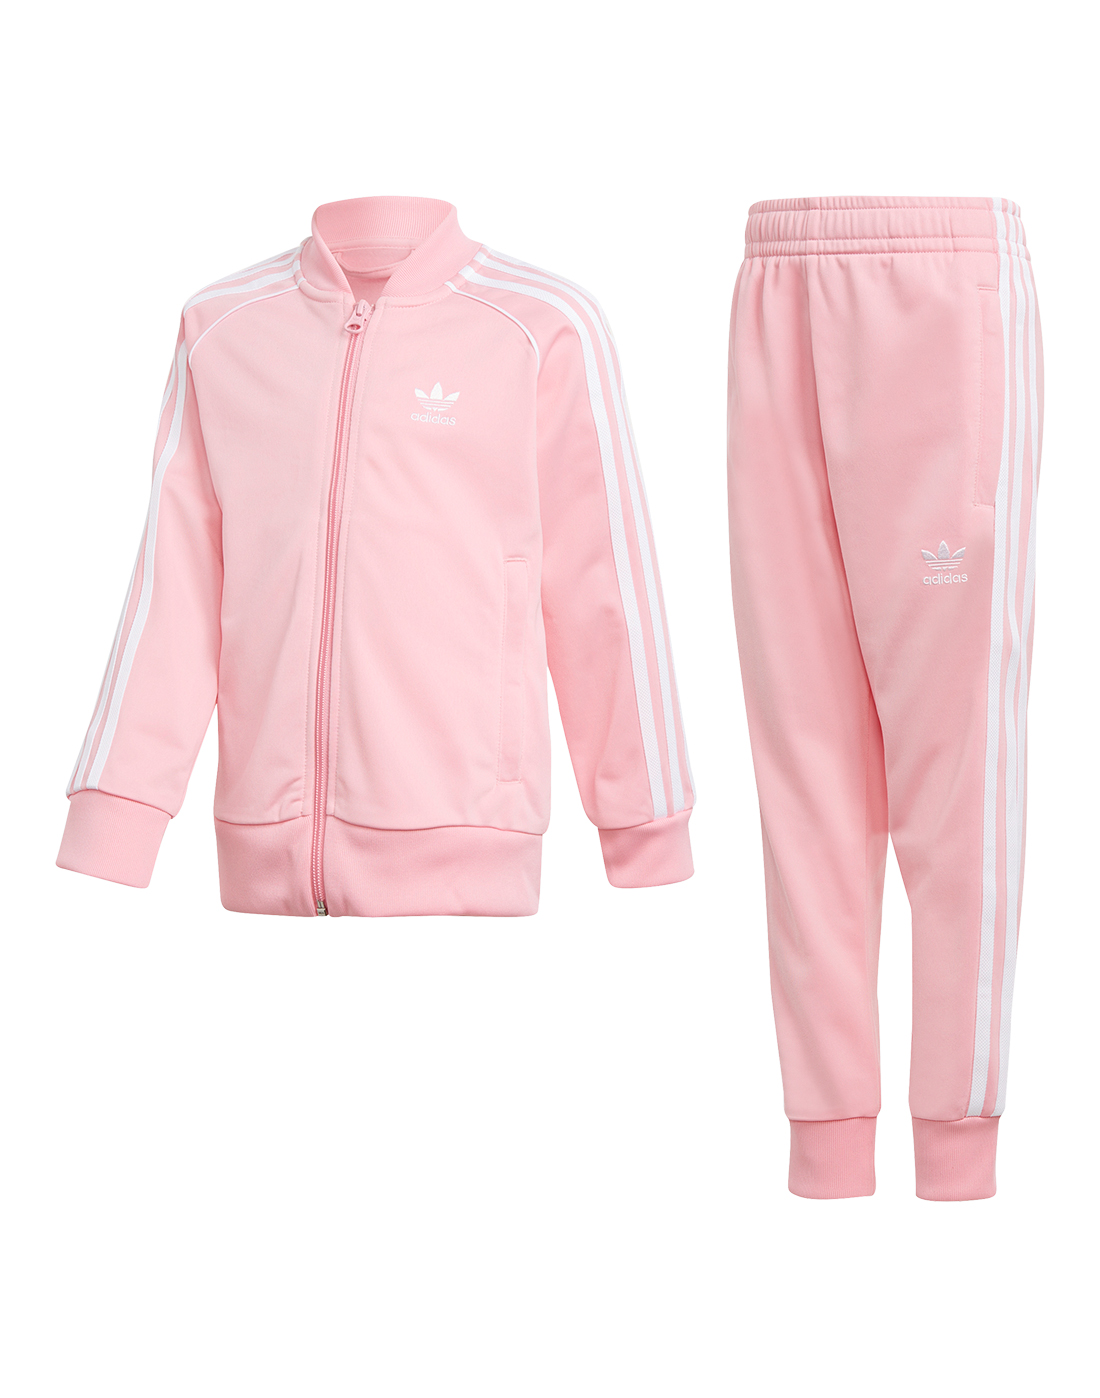 adults adidas tracksuit